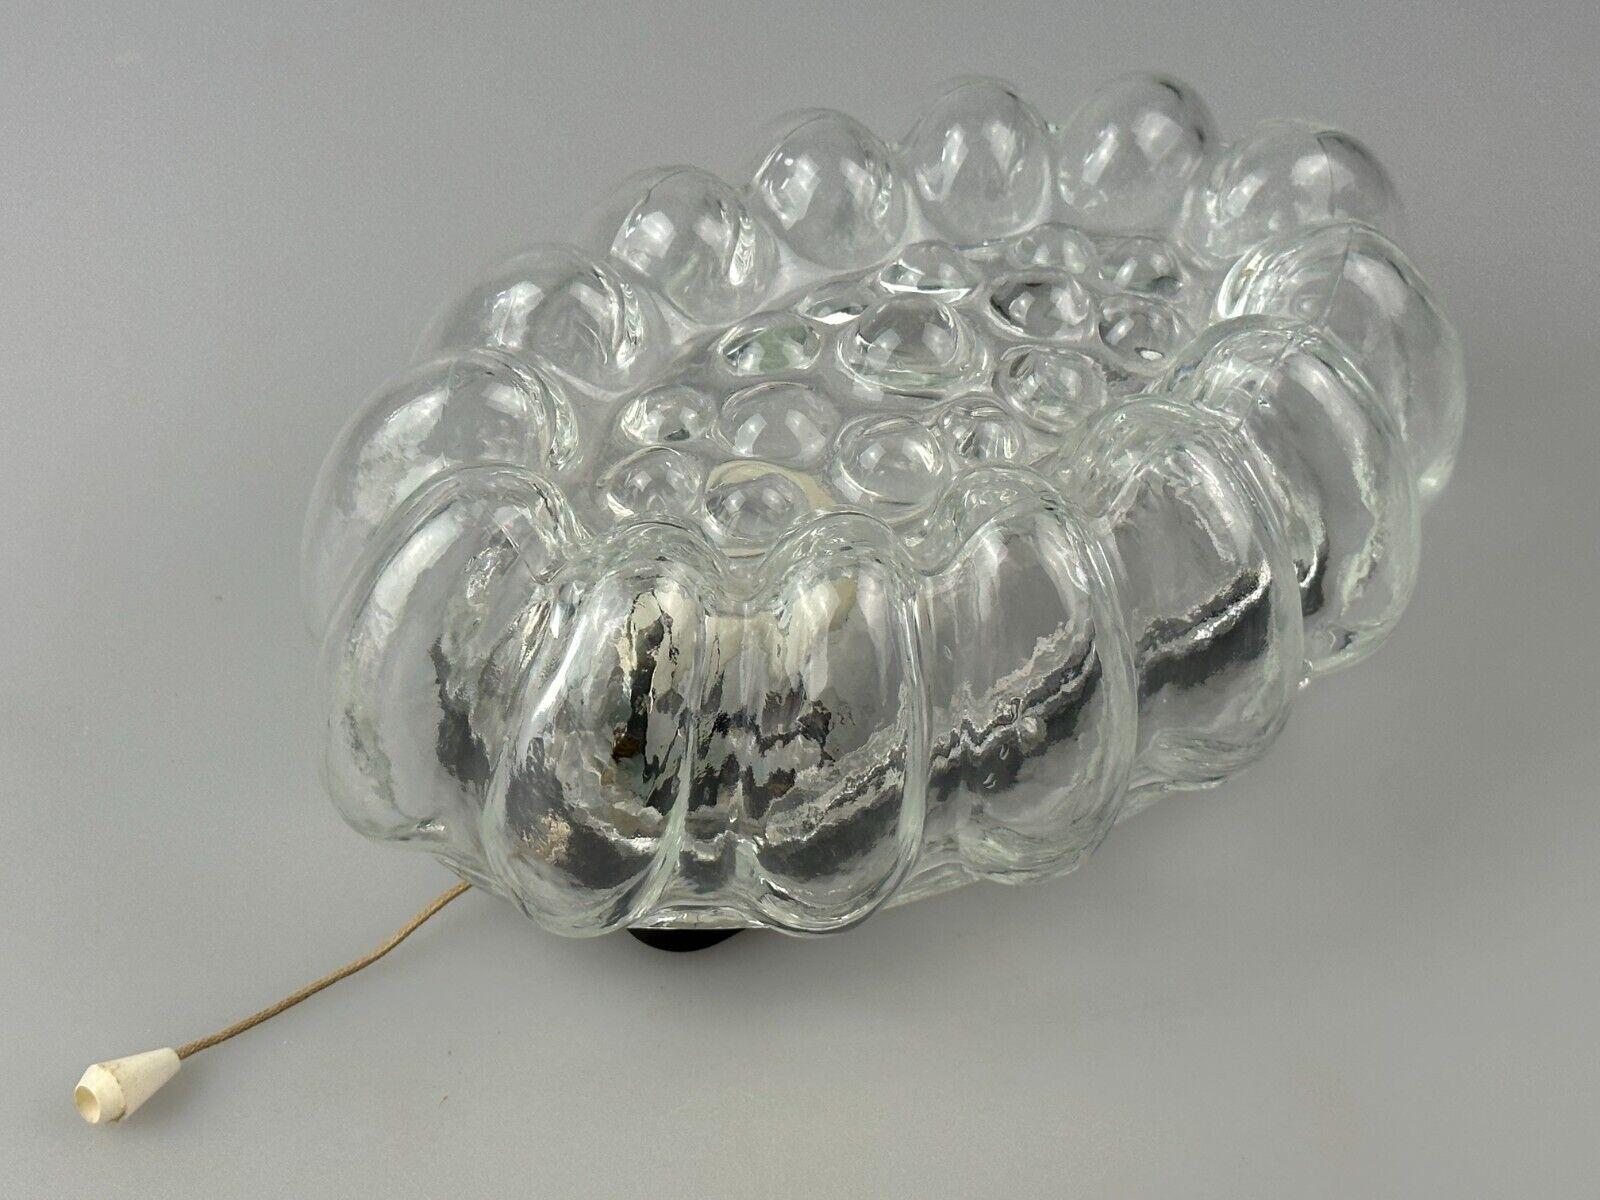 Metal 60s 70s wall lamp made of glass & metal bubble wall sconce space age design For Sale